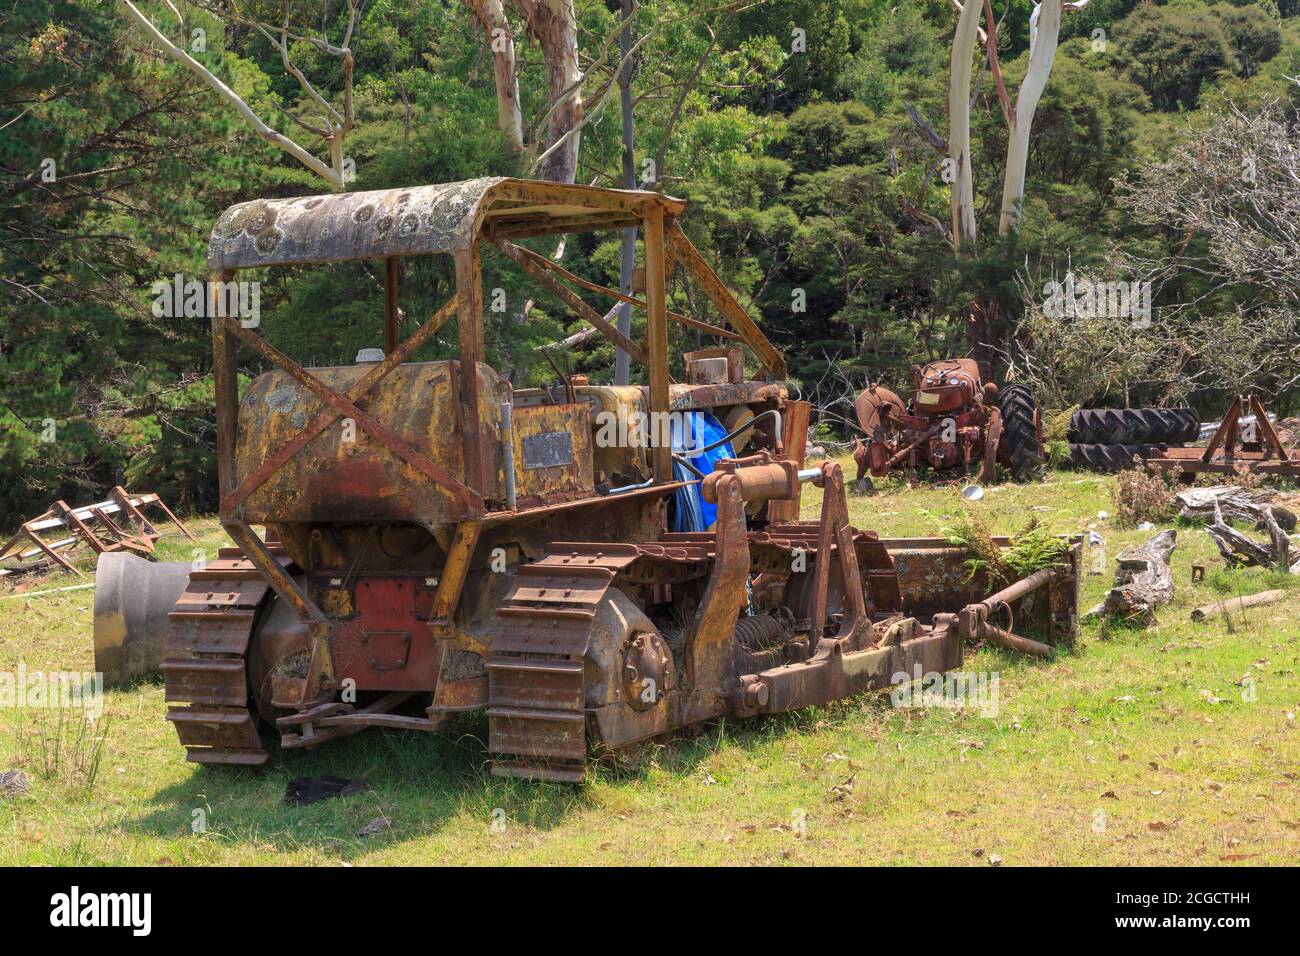 An old, rusty bulldozer, abandoned on a farm with other machinery Stock Photo